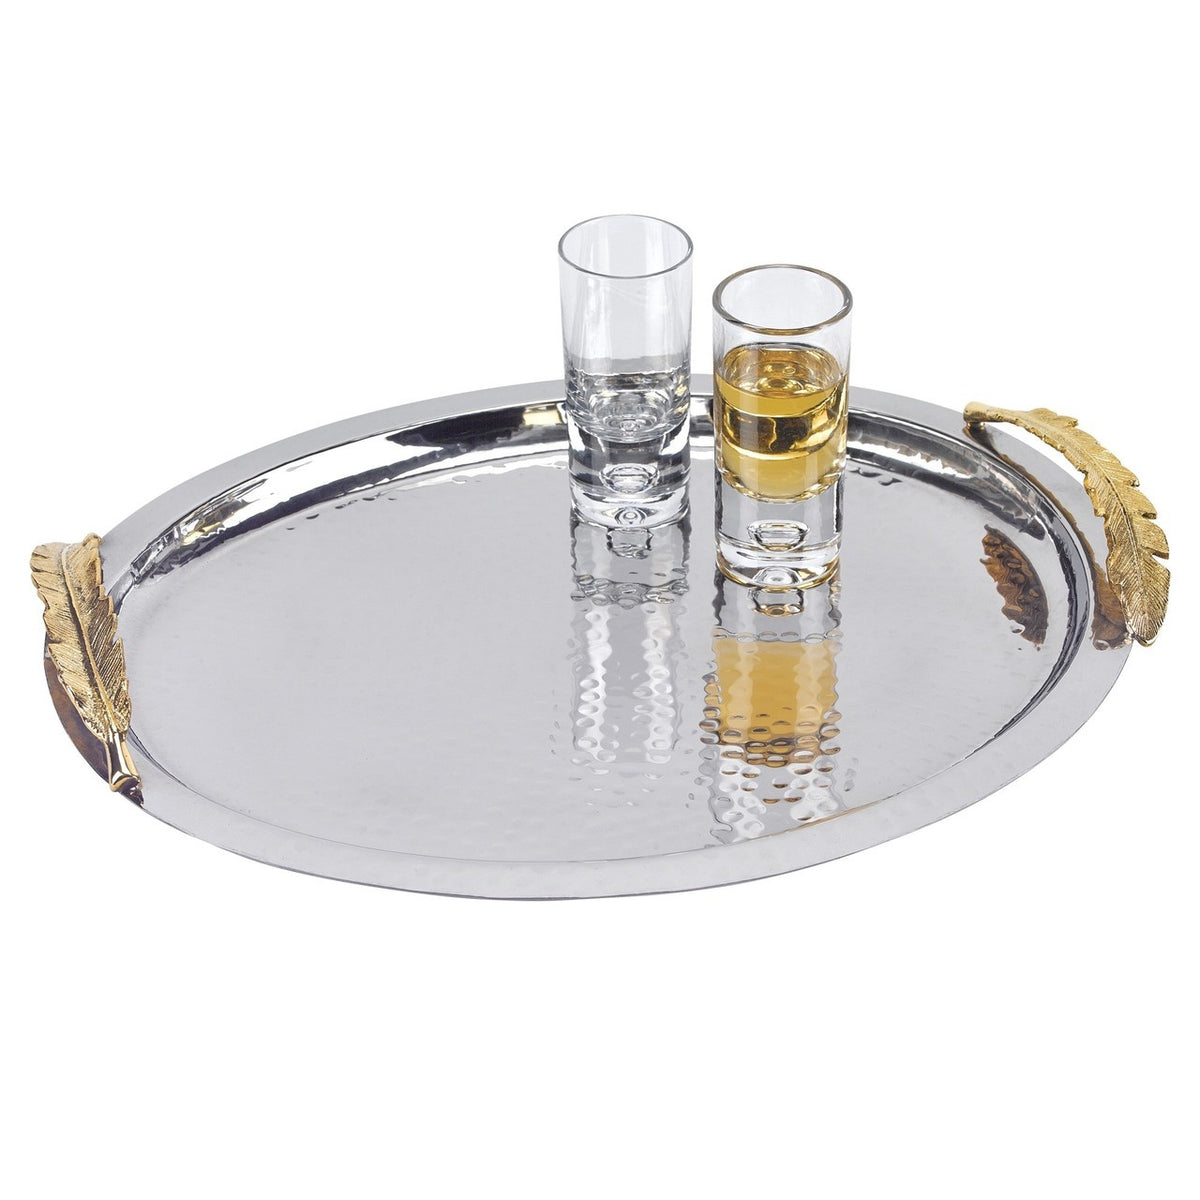 Feathers Stainless Steel Brass Oval Serving Tray